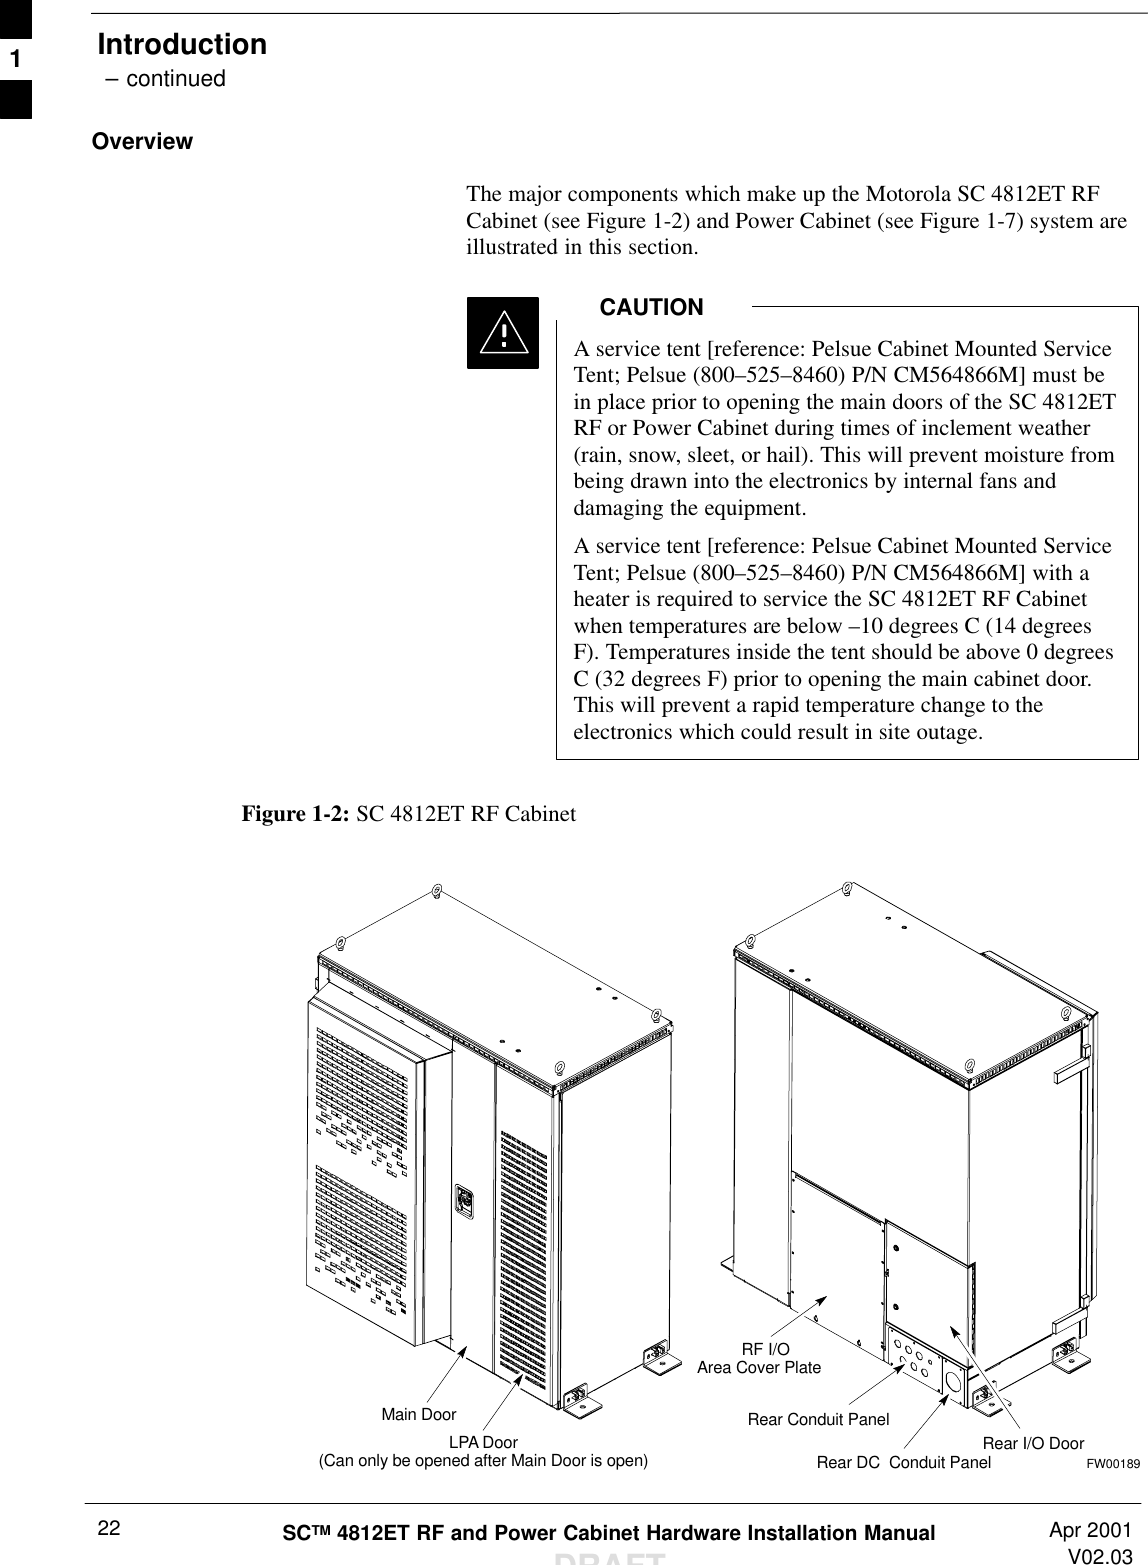 Introduction – continuedSCTM 4812ET RF and Power Cabinet Hardware Installation ManualDRAFTApr 2001V02.0322OverviewThe major components which make up the Motorola SC 4812ET RFCabinet (see Figure 1-2) and Power Cabinet (see Figure 1-7) system areillustrated in this section.A service tent [reference: Pelsue Cabinet Mounted ServiceTent; Pelsue (800–525–8460) P/N CM564866M] must bein place prior to opening the main doors of the SC 4812ETRF or Power Cabinet during times of inclement weather(rain, snow, sleet, or hail). This will prevent moisture frombeing drawn into the electronics by internal fans anddamaging the equipment.A service tent [reference: Pelsue Cabinet Mounted ServiceTent; Pelsue (800–525–8460) P/N CM564866M] with aheater is required to service the SC 4812ET RF Cabinetwhen temperatures are below –10 degrees C (14 degreesF). Temperatures inside the tent should be above 0 degreesC (32 degrees F) prior to opening the main cabinet door.This will prevent a rapid temperature change to theelectronics which could result in site outage.CAUTIONFigure 1-2: SC 4812ET RF CabinetMain DoorLPA Door(Can only be opened after Main Door is open)RF I/OArea Cover PlateRear I/O DoorRear DC  Conduit PanelRear Conduit PanelFW001891